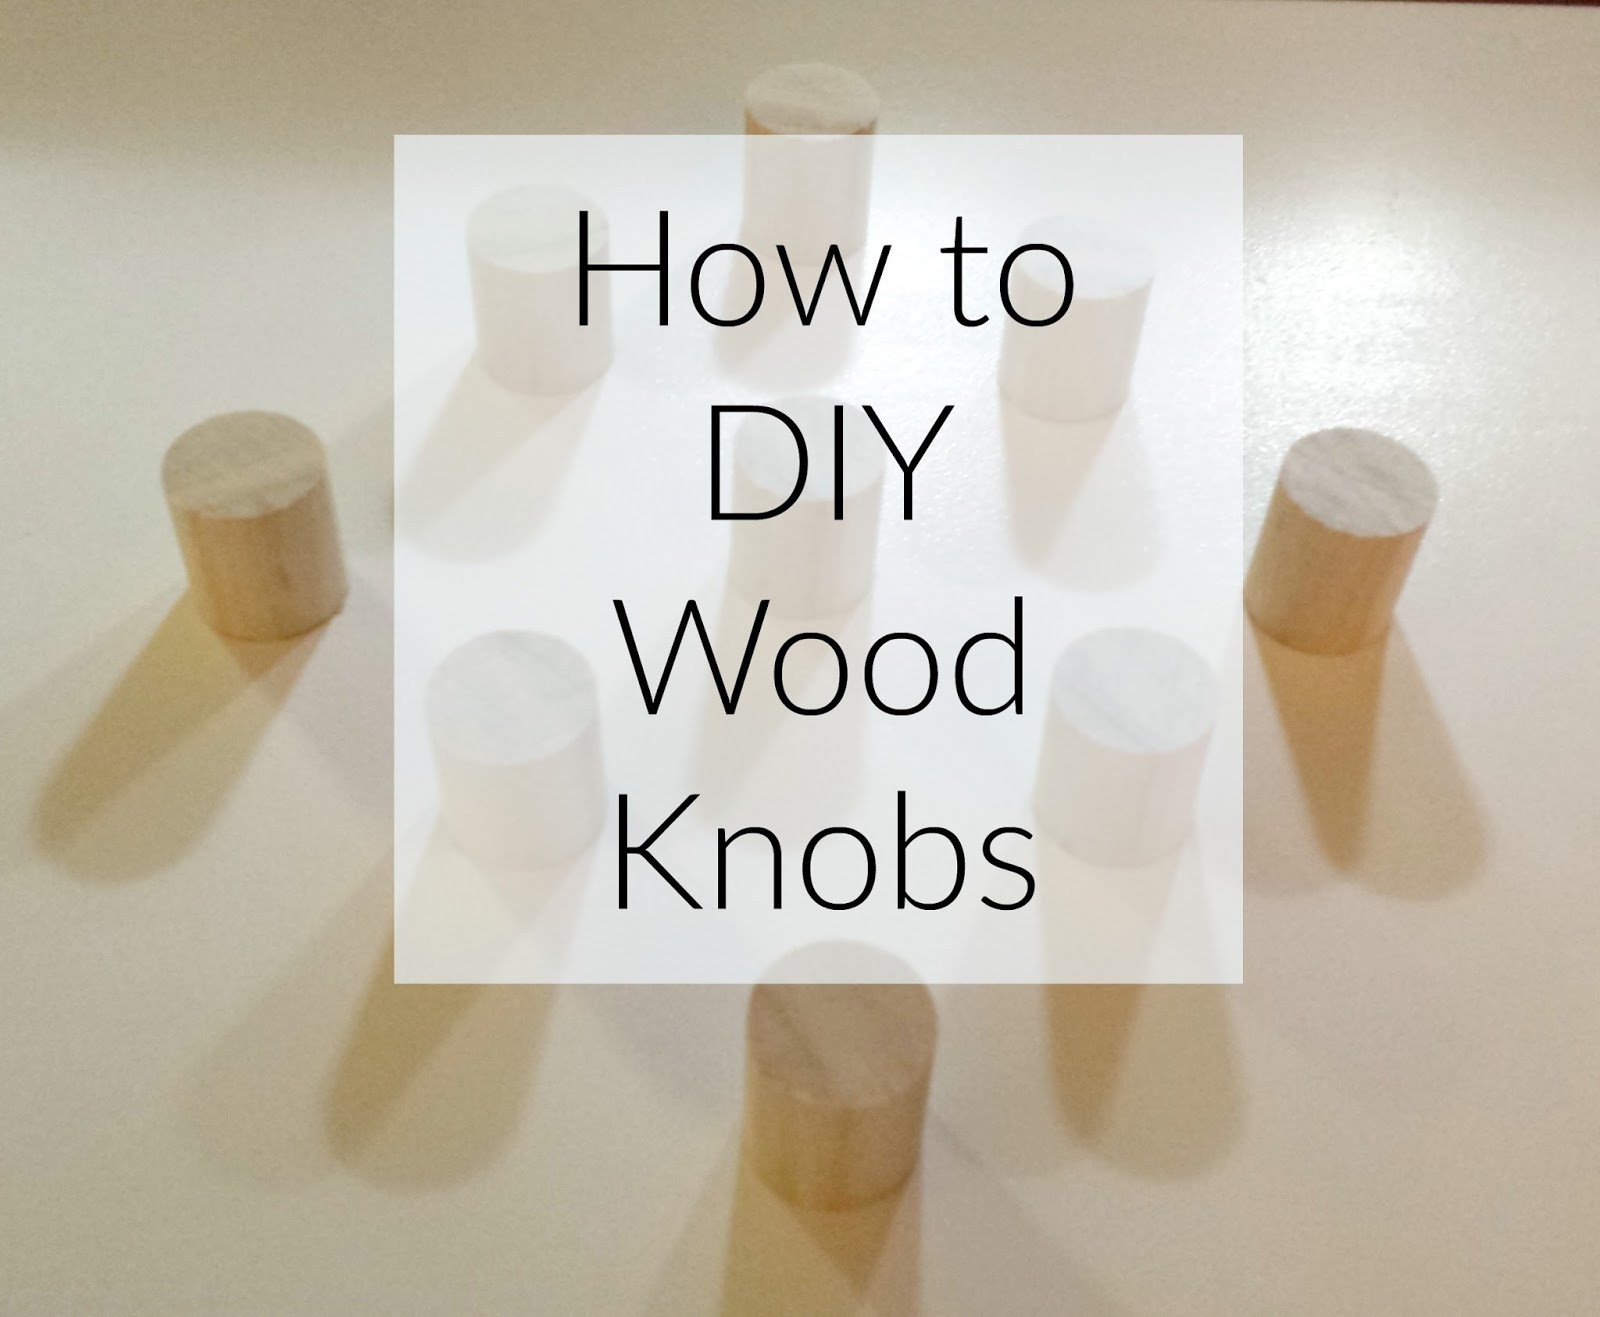 DIY Wooden Knobs
 Lilly s Home Designs How To DIY Wood Knobs